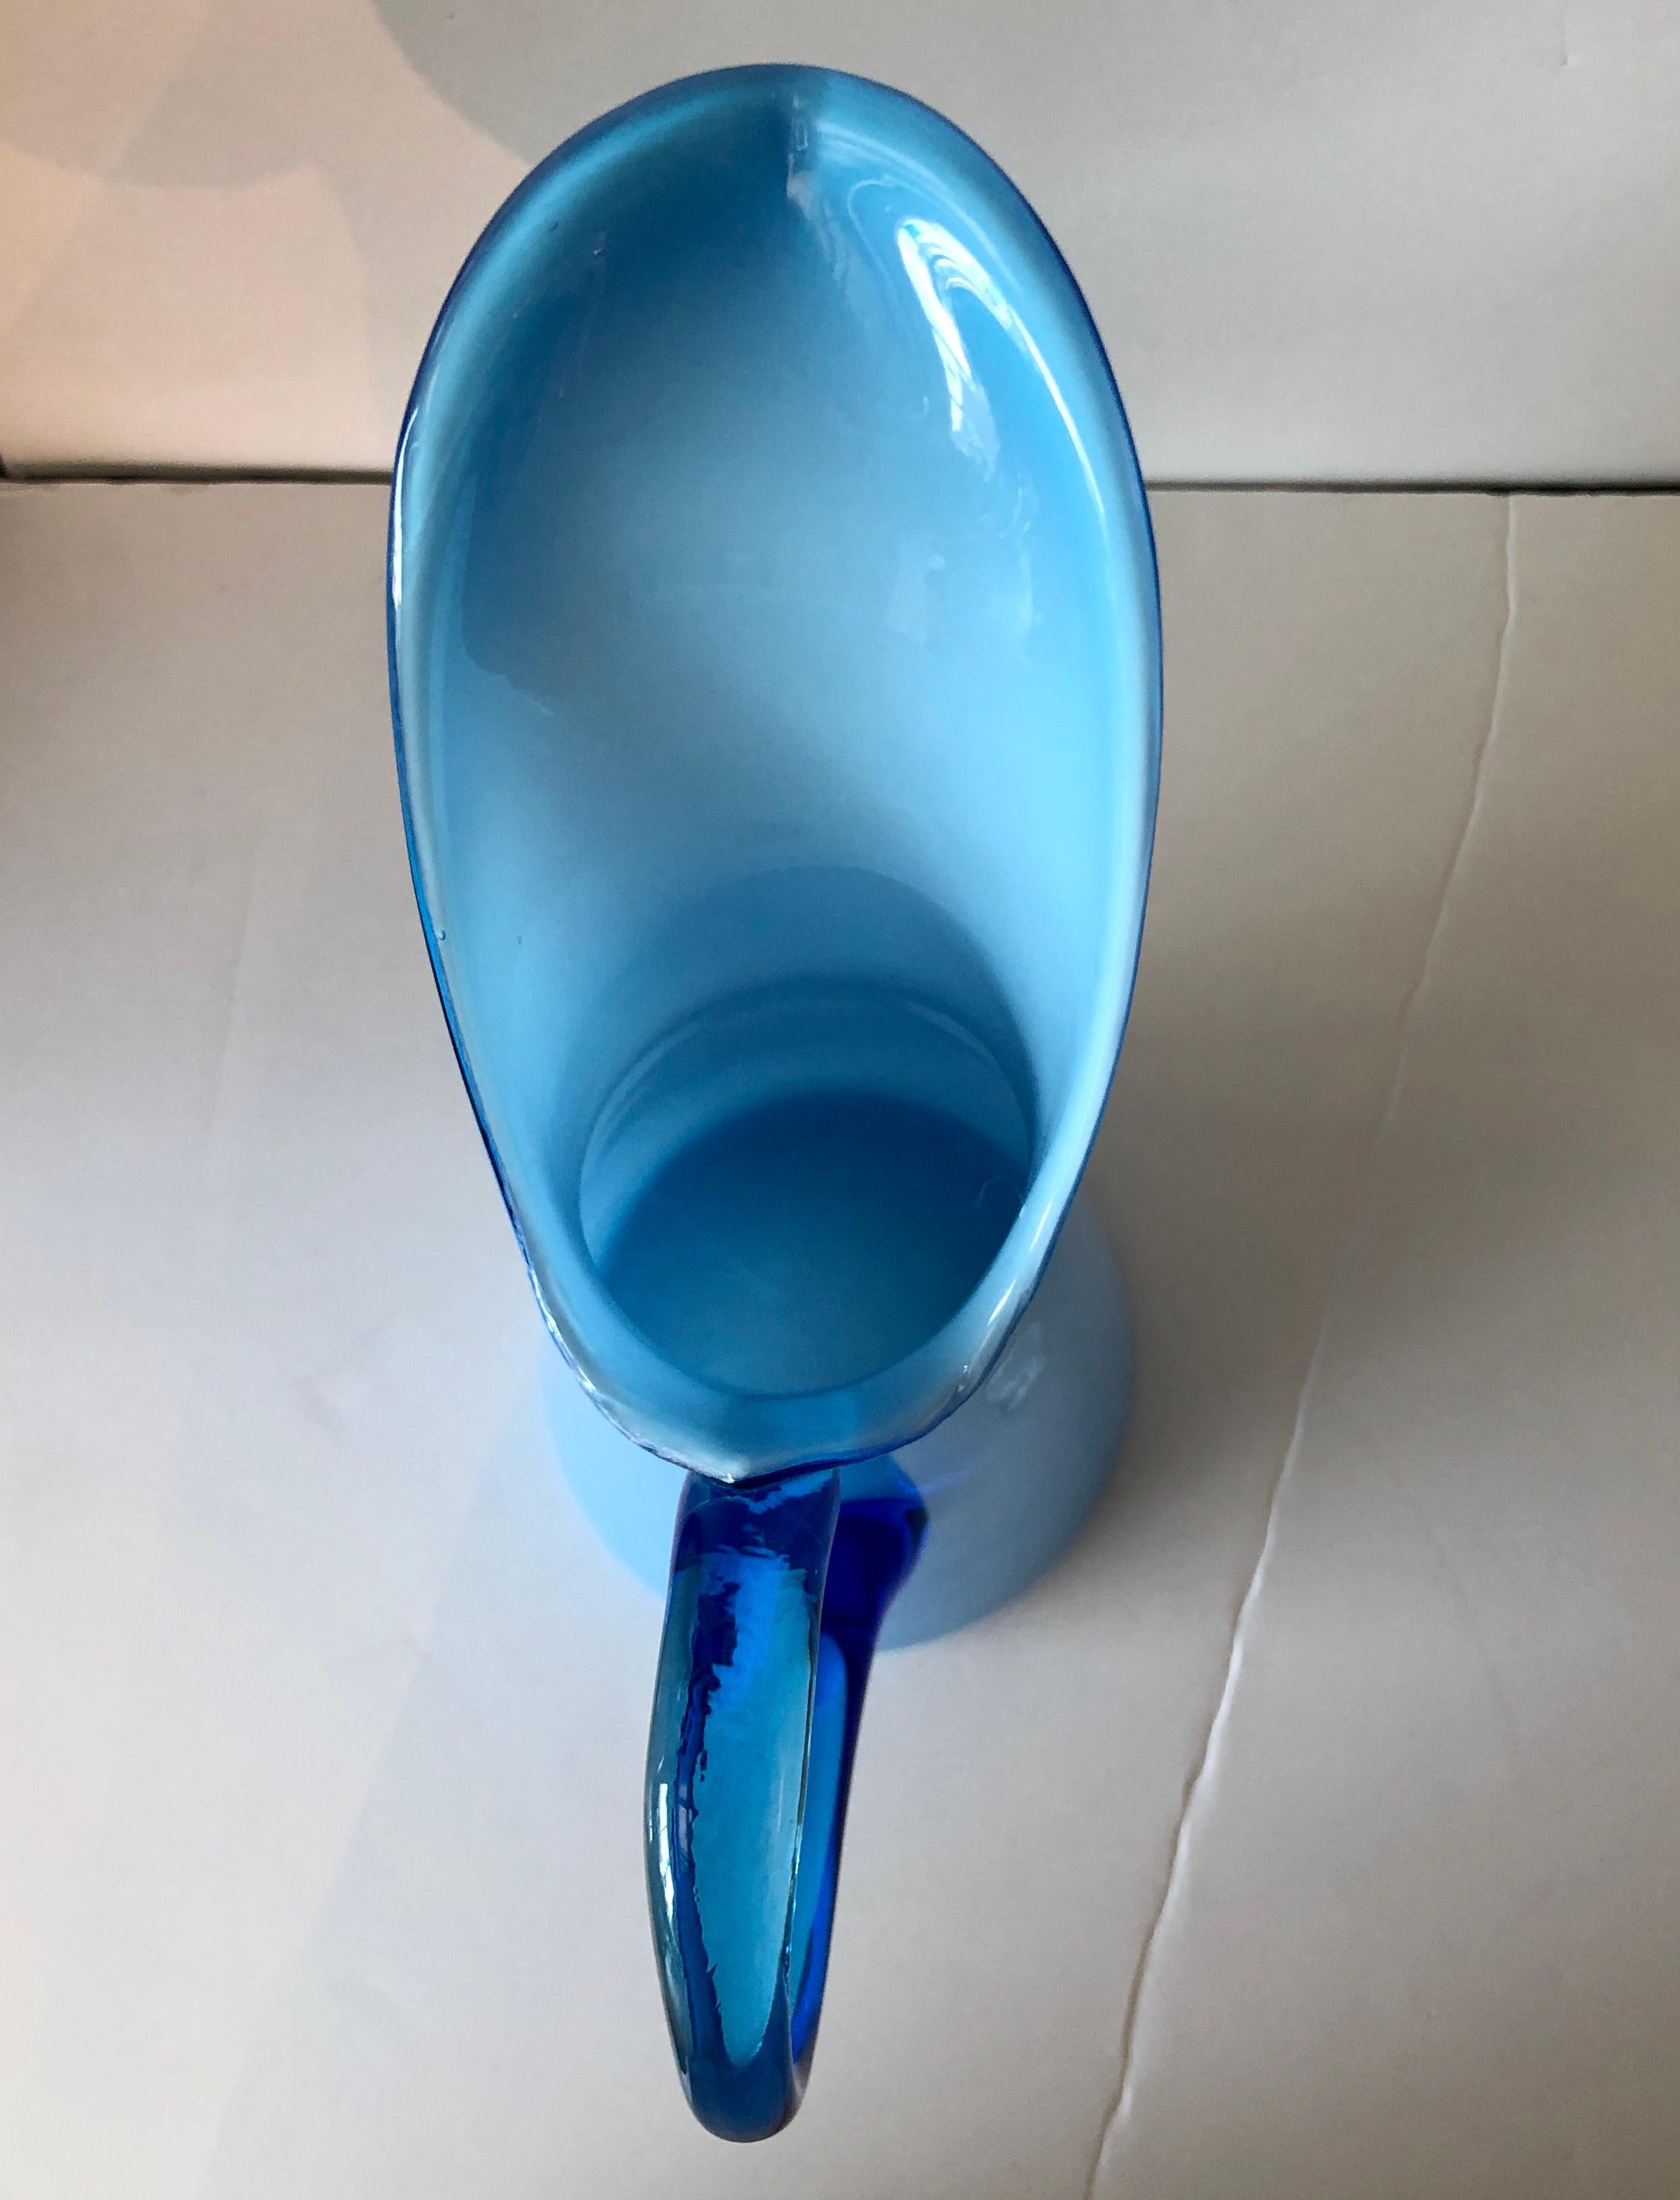 Azure Blue Over White Cased Venetian Glass Pitcher with Darker Blue Handle For Sale 2